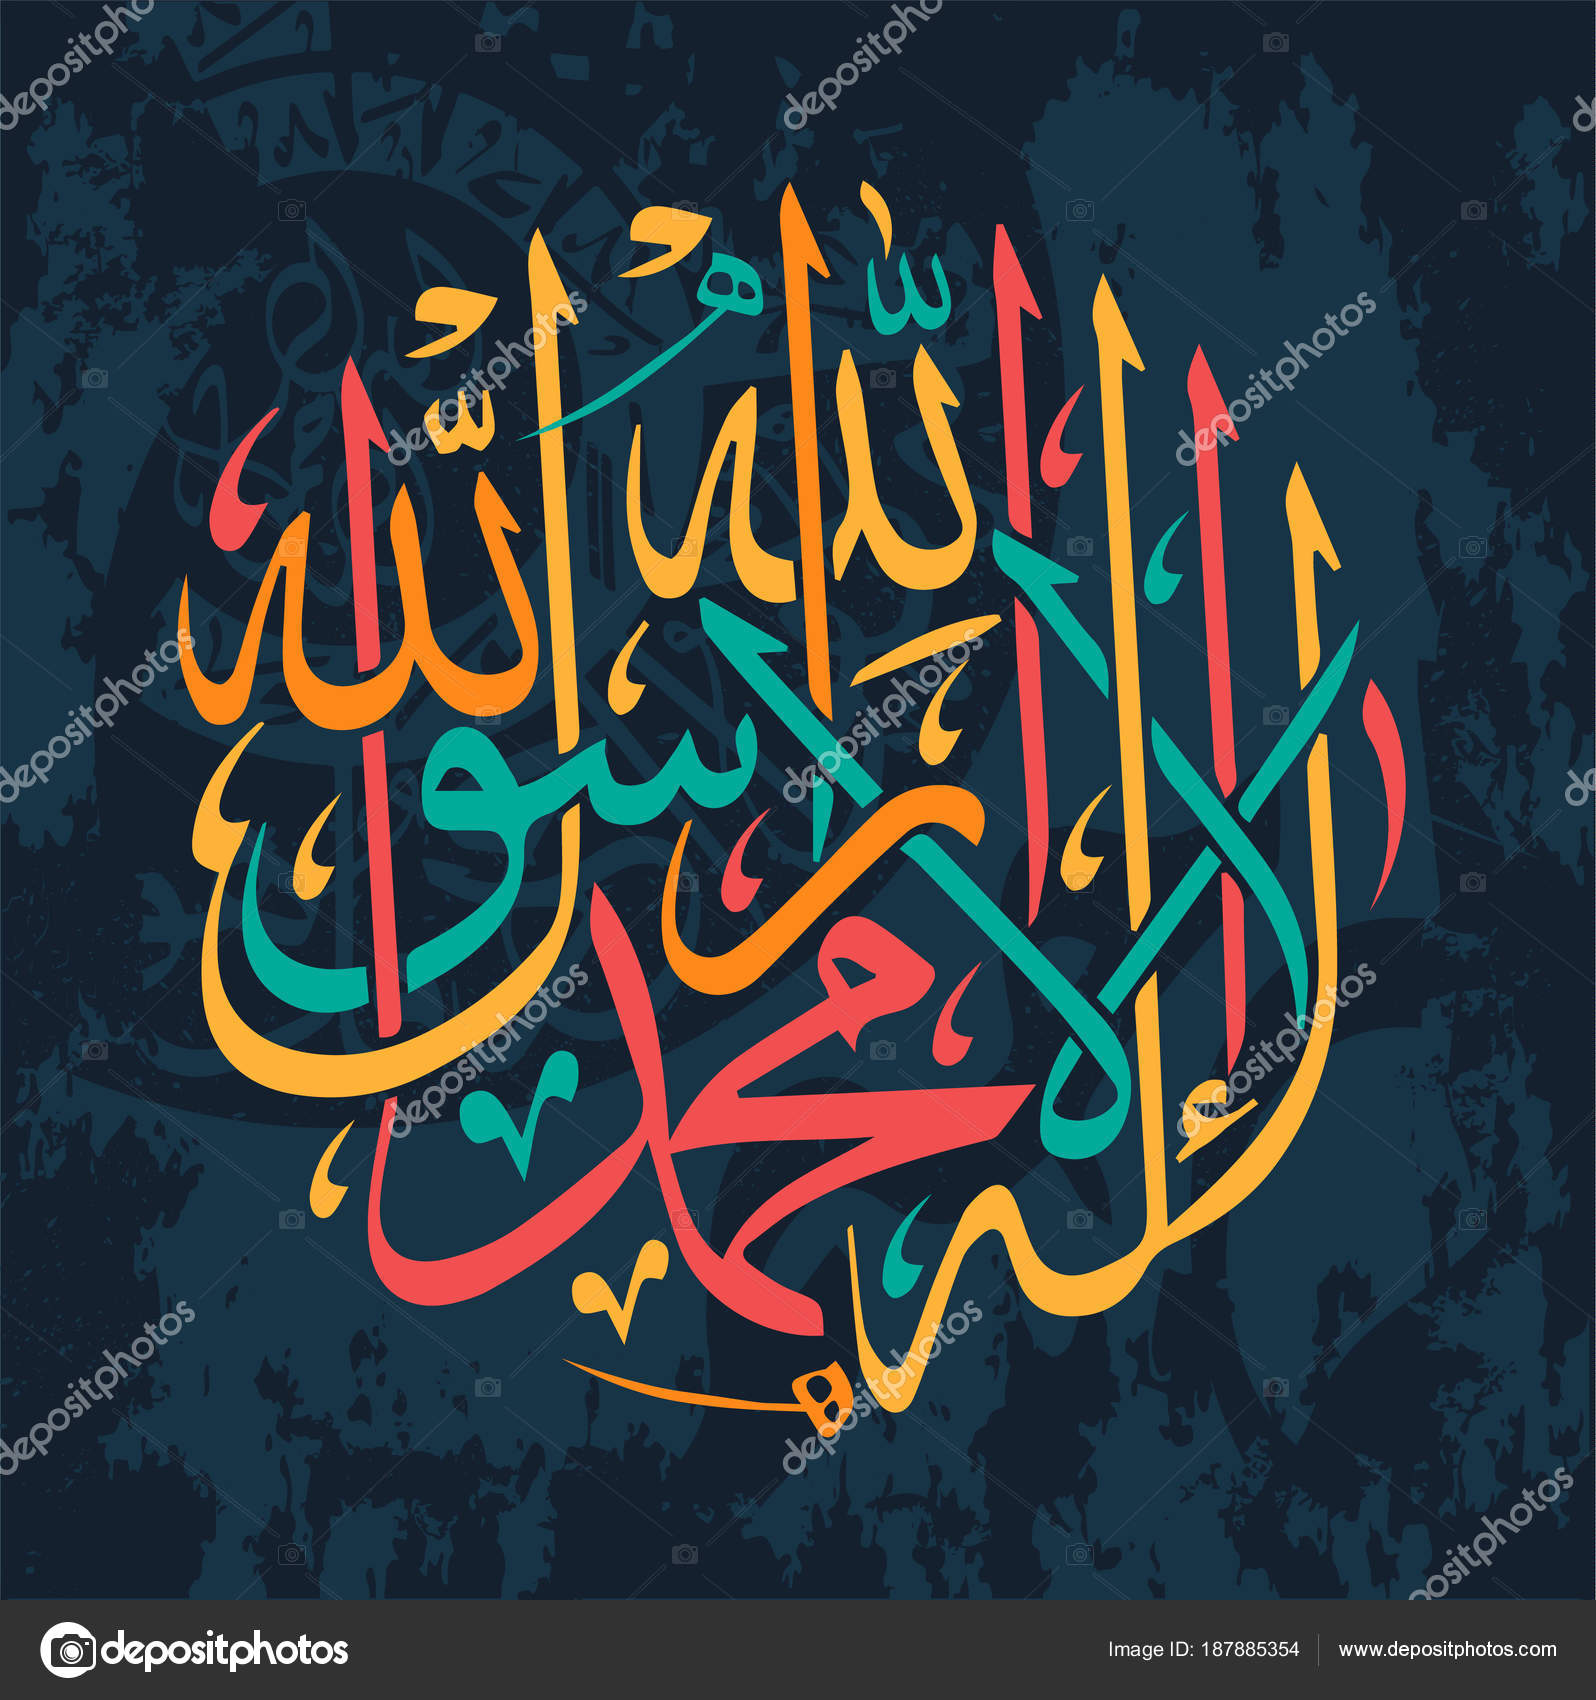 La Ilaha Illallah Muhammadur Rasulullah For The Design Of Islamic Holidays This Colligraphy Means There Is No God Worthy Of Worship Except Allah And Muhammad Is His Messenger Stock Vector Image By C Zamir